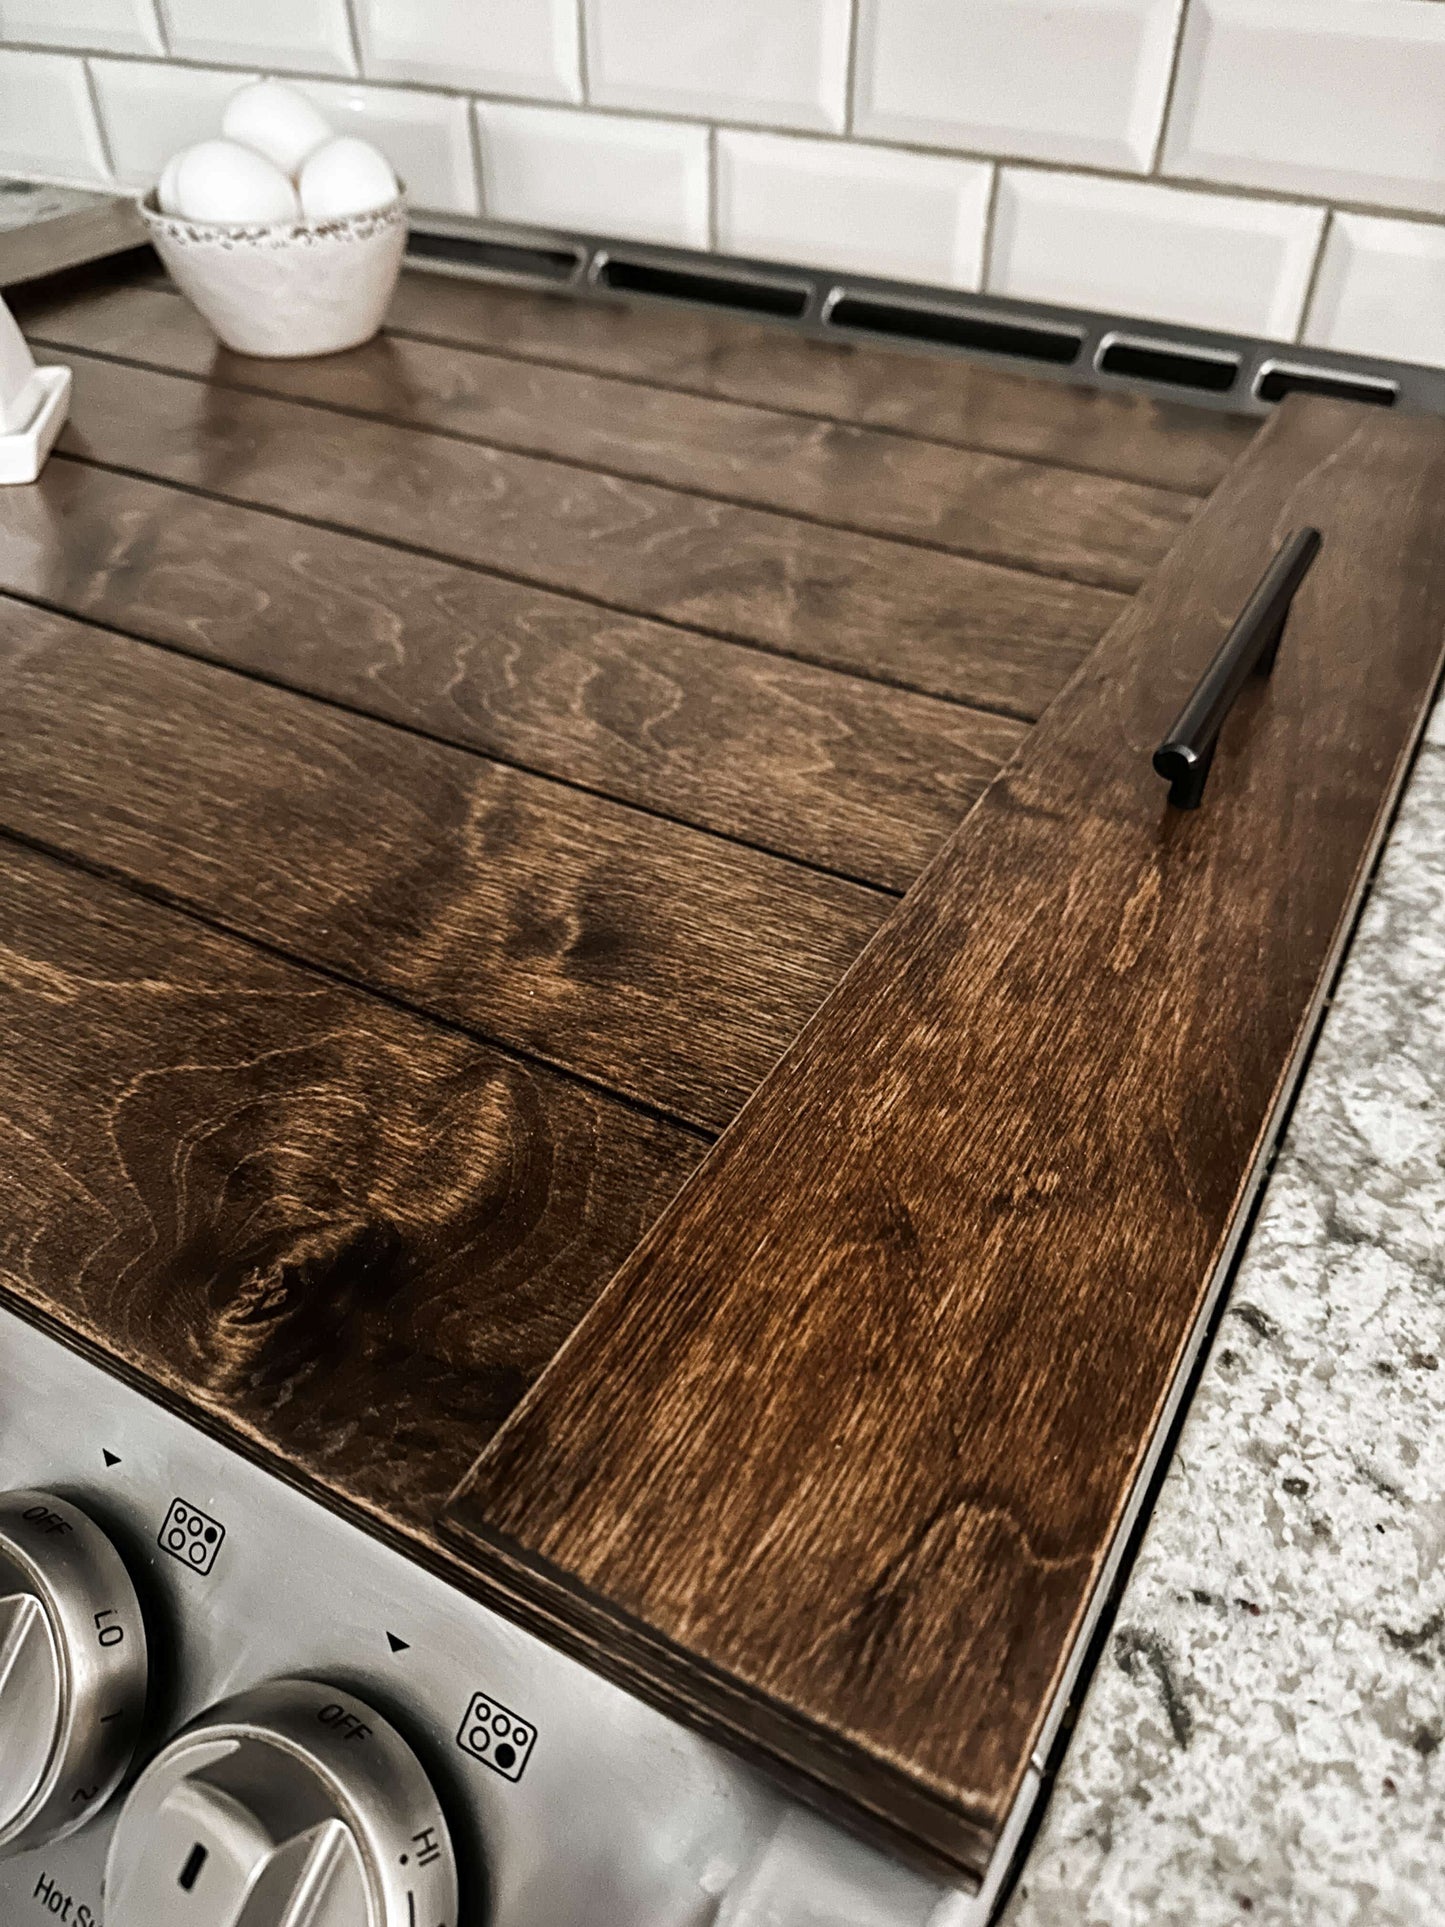 Slatted Wooden Noodle Board, Stove Cover